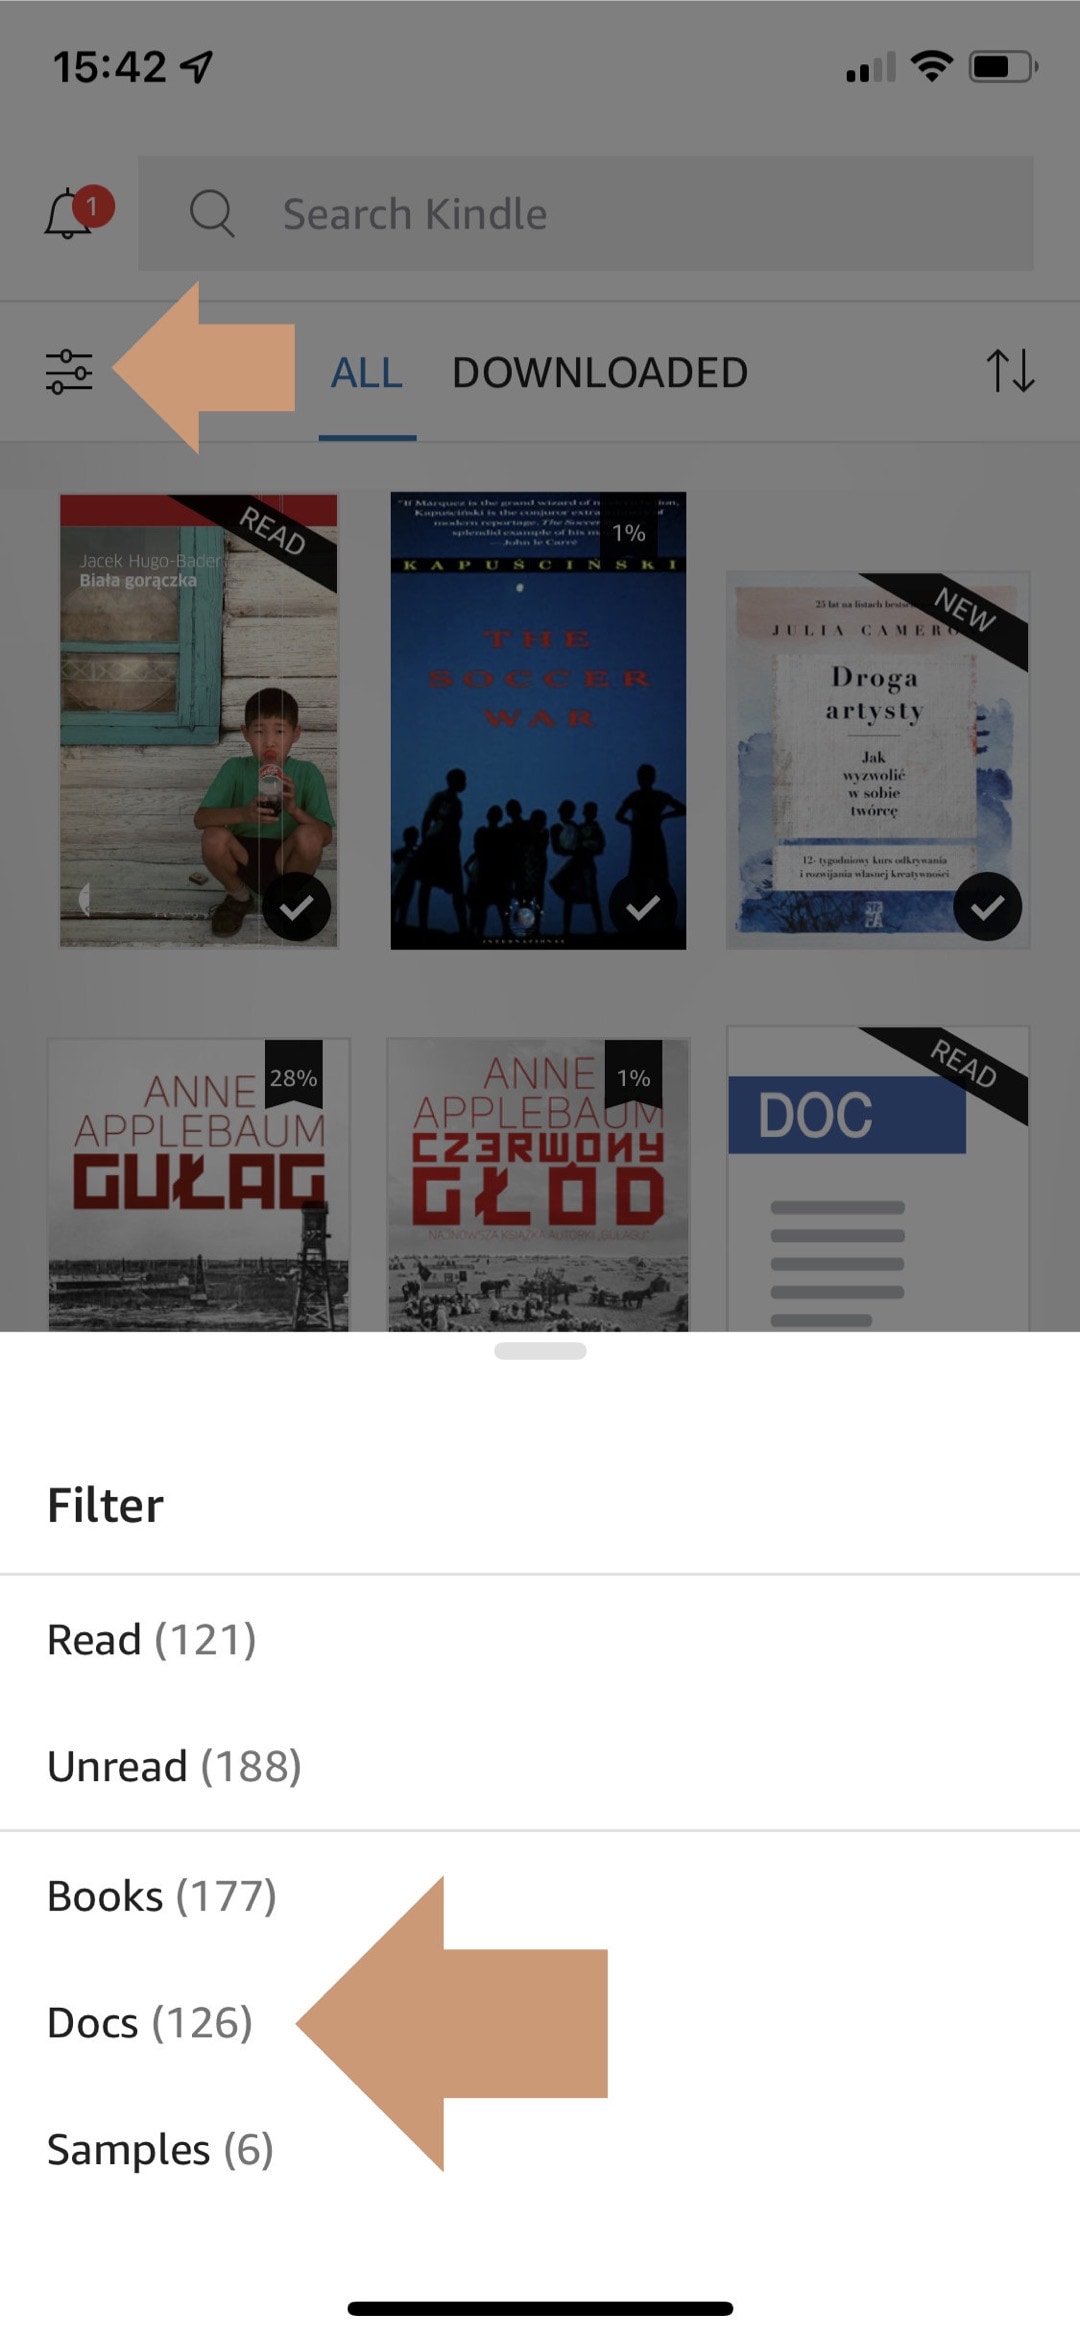 Own books are called Docs in Kindle app